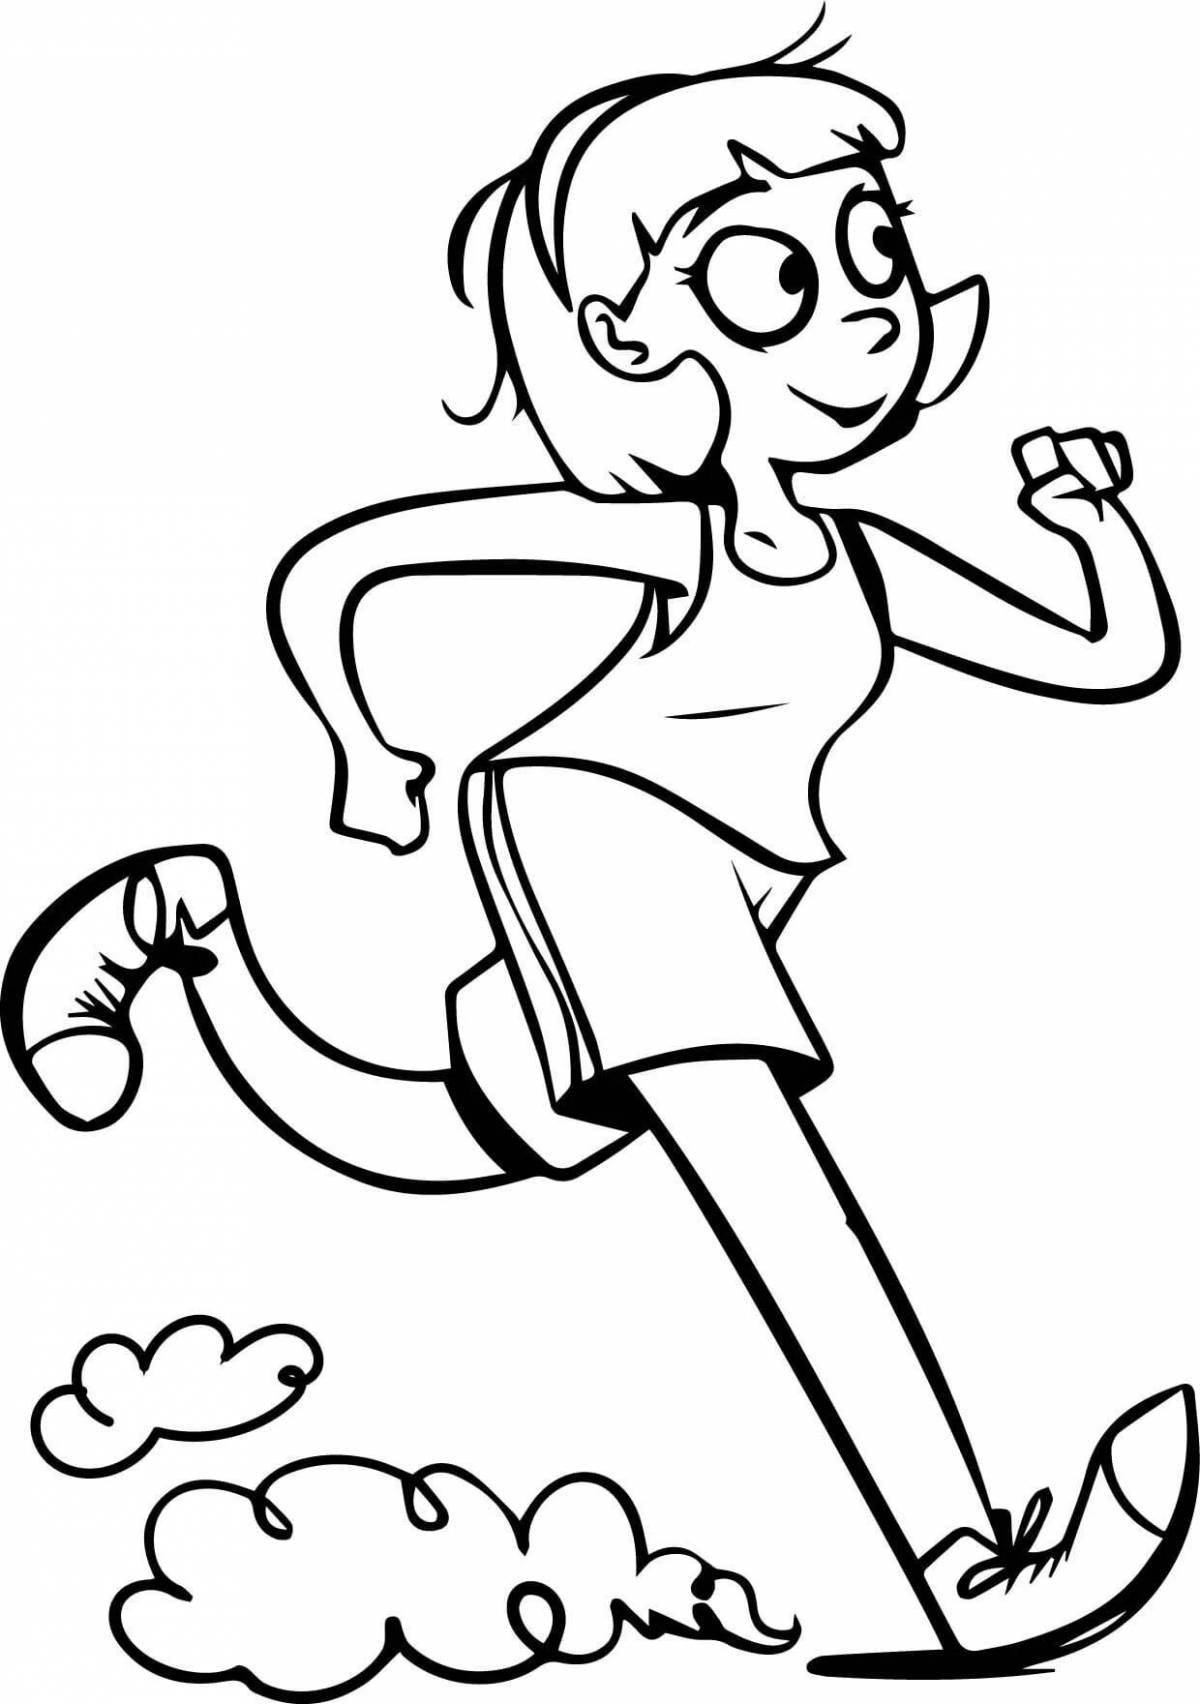 Animated running coloring